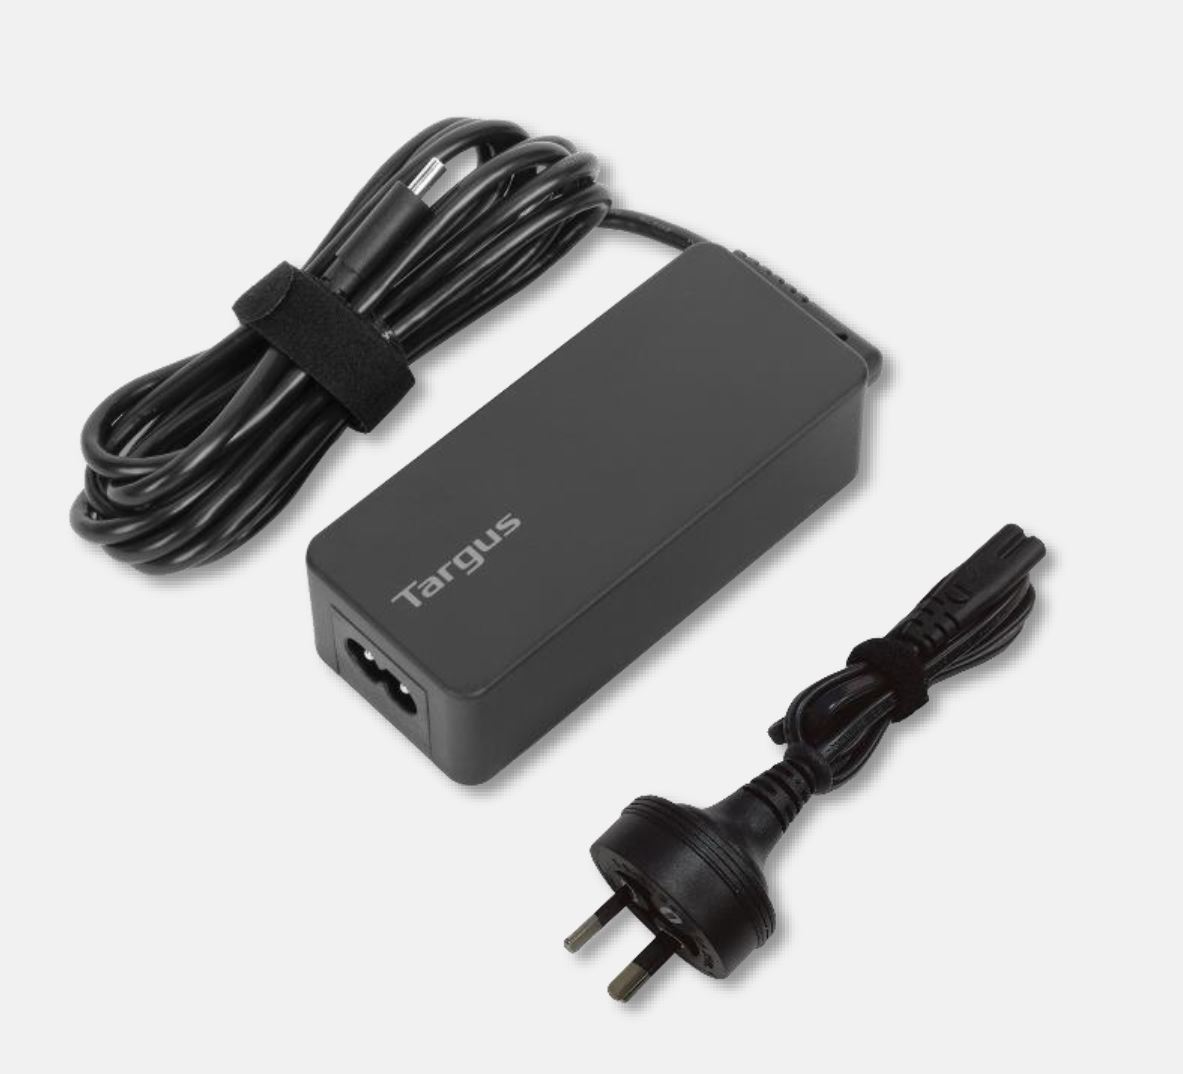 Targus 45W USB-C Power, Built-in Power Supply Protection; 1.8M Cable 2 Years Limited Warranty